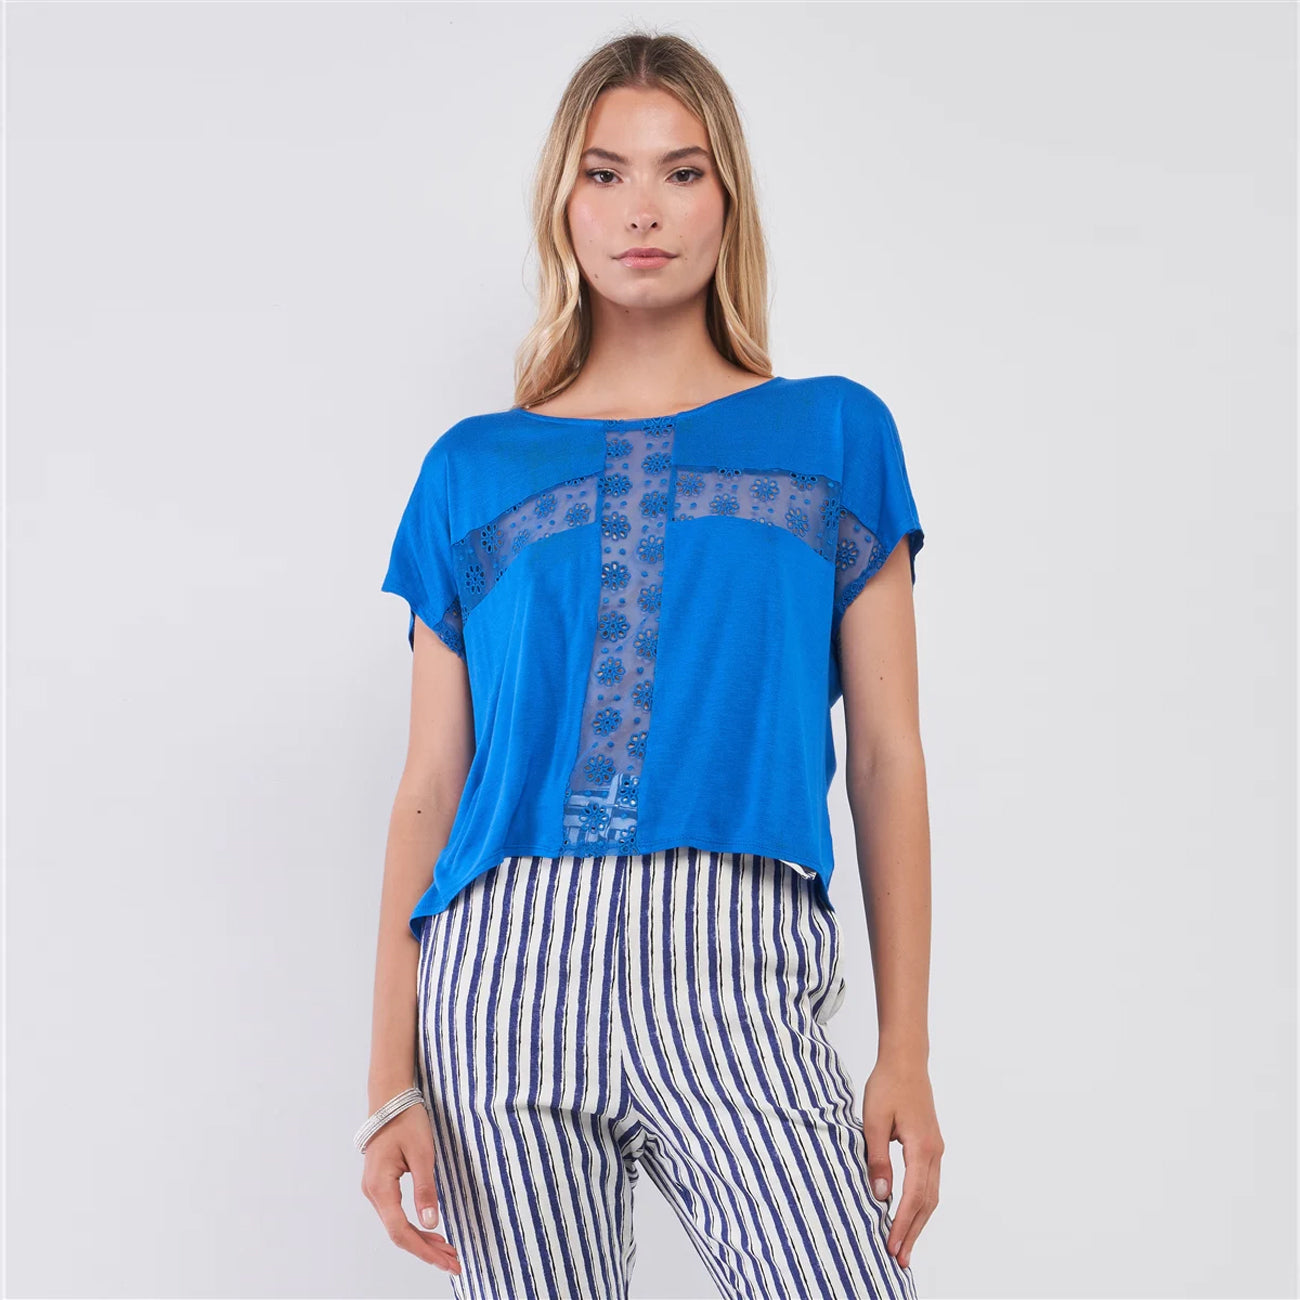 Royal Blue Boat Neck Cross Floral Embroidery Women's Top